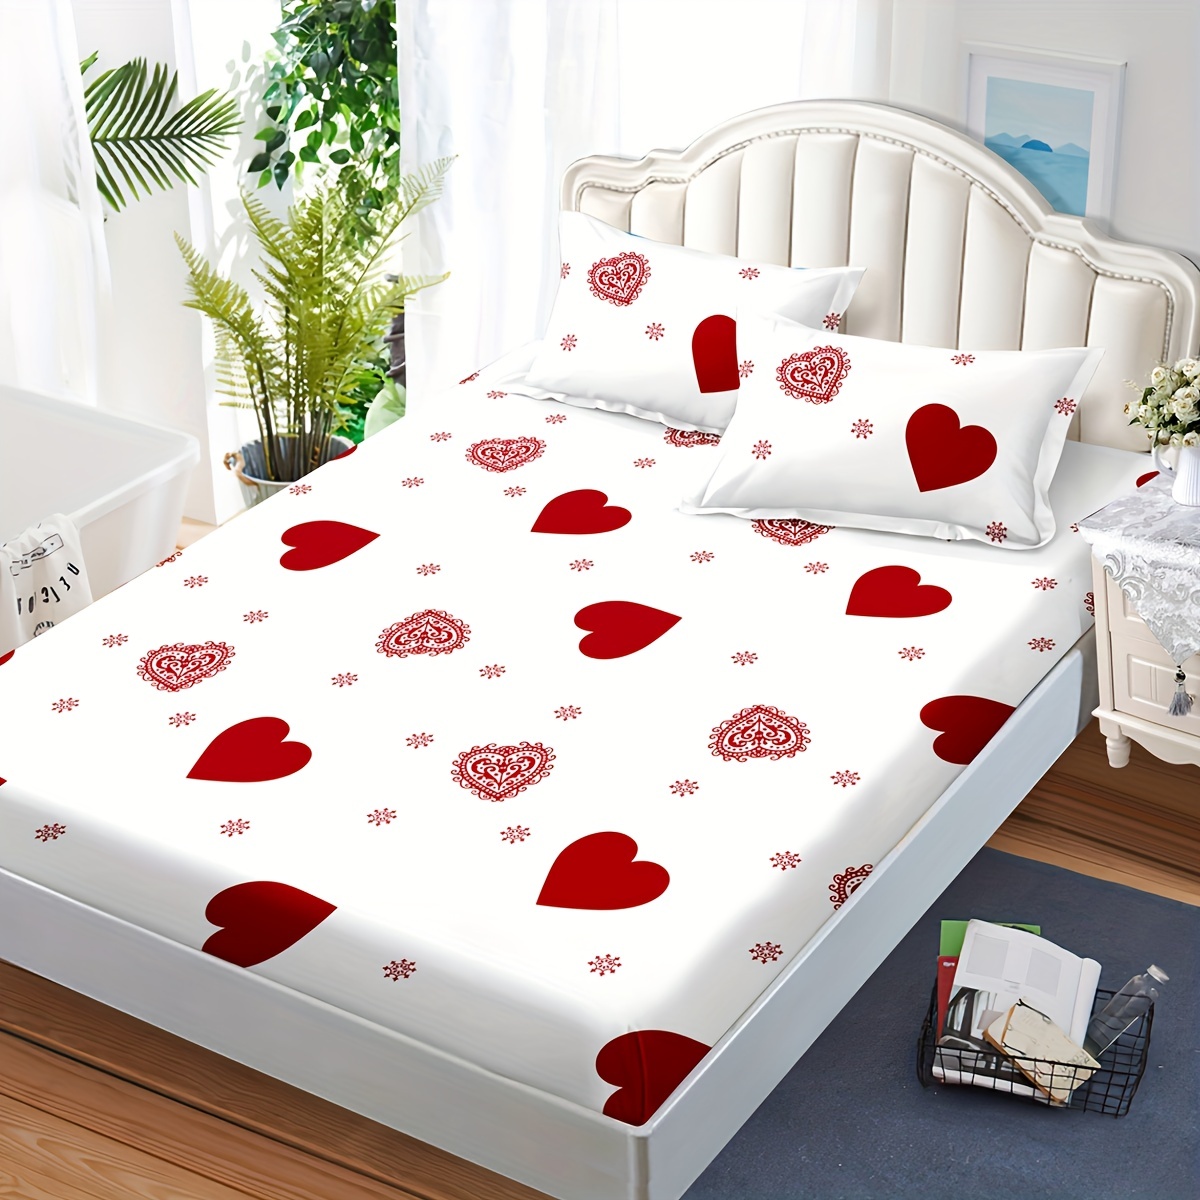 

1pc Fitted Sheet (without Pillowcase), Red Heart Print Bedding Sheet For Bedroom Guest Room Hotel, Without Pillowcase, Fitted Sheet Only